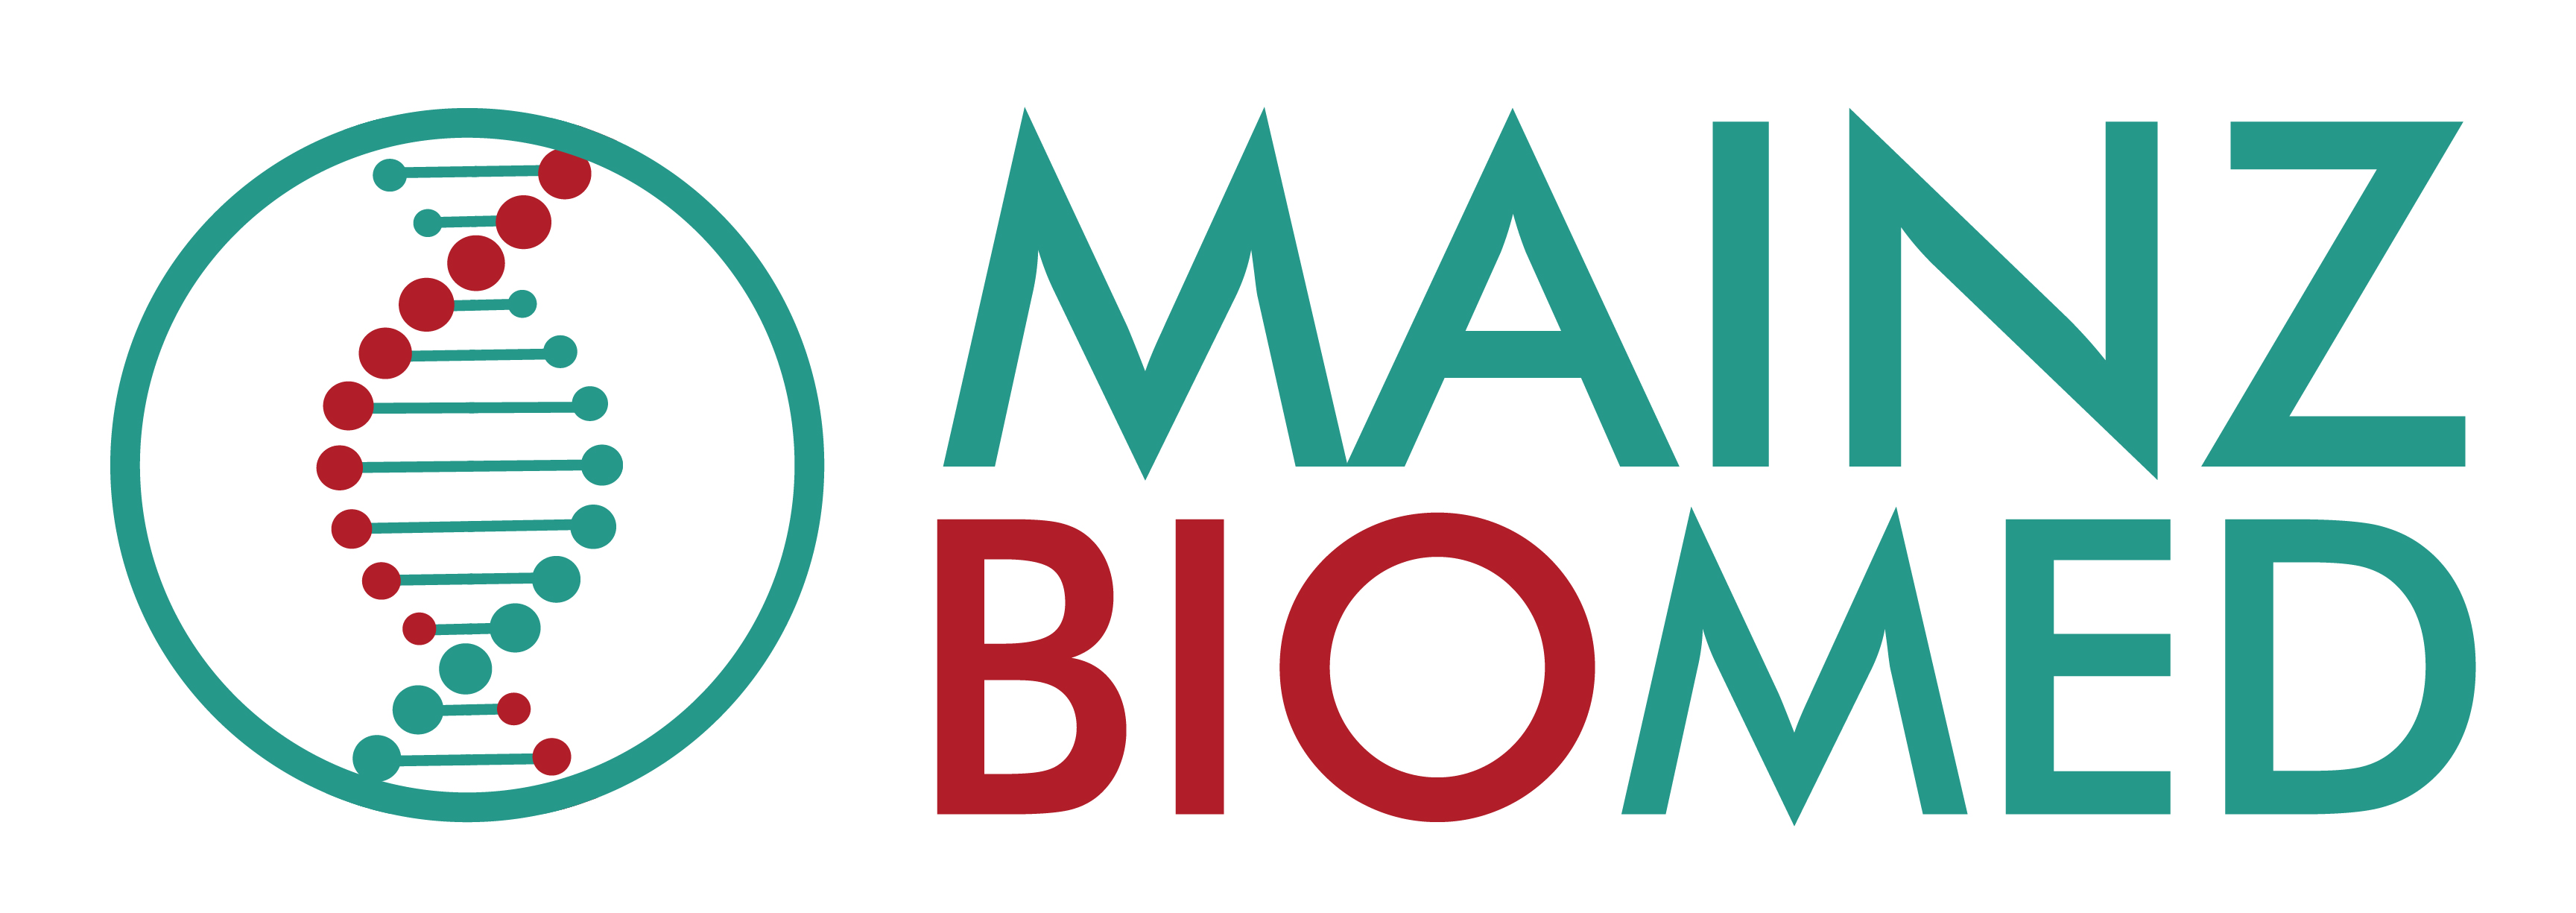 Read more about the article Mainz Biomed to Exhibit ColoAlert at MEDICA 2021, the World’s Largest Medical Trade Fair